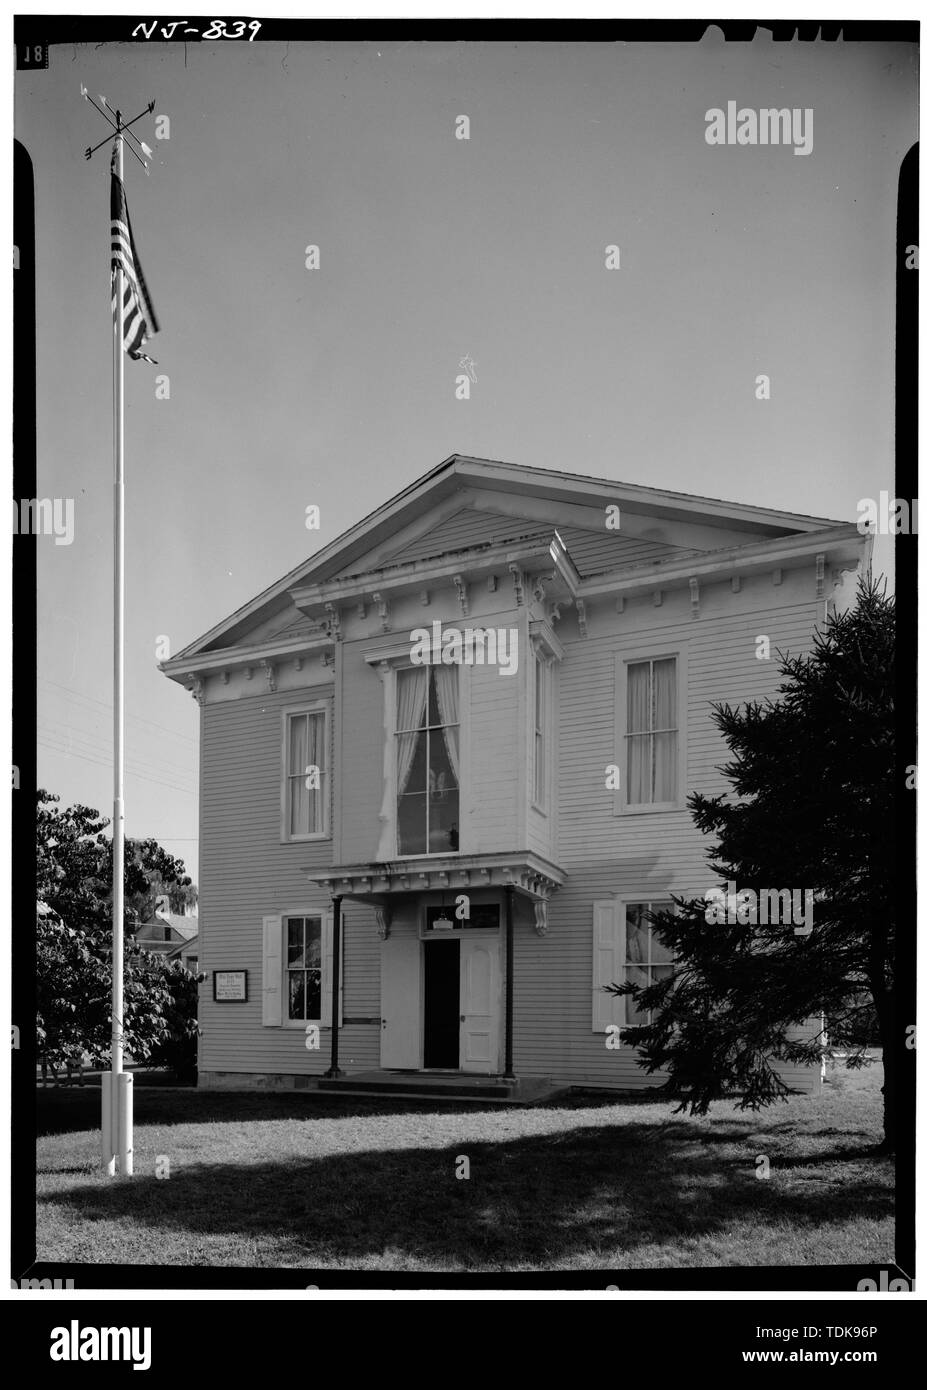 October 1972 NORTH (FRONT) ELEVATION - Mullica Hill Town Hall, South Main Street (Bridgeton Pike) and Woodstown Road, Mullica Hill, Gloucester County, NJ Stock Photo